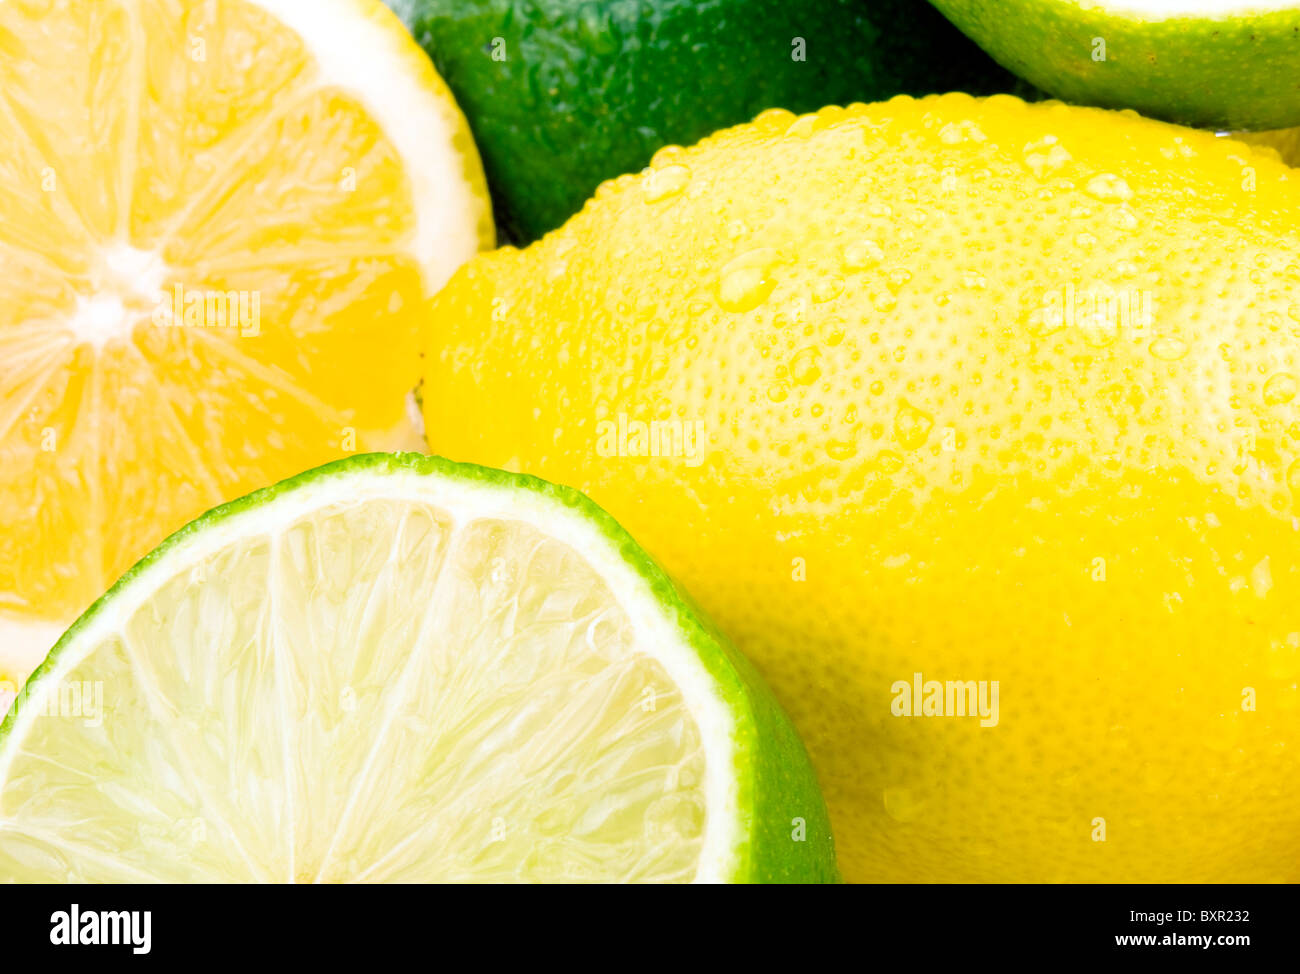 Closeup picture of lemon and lime Stock Photo